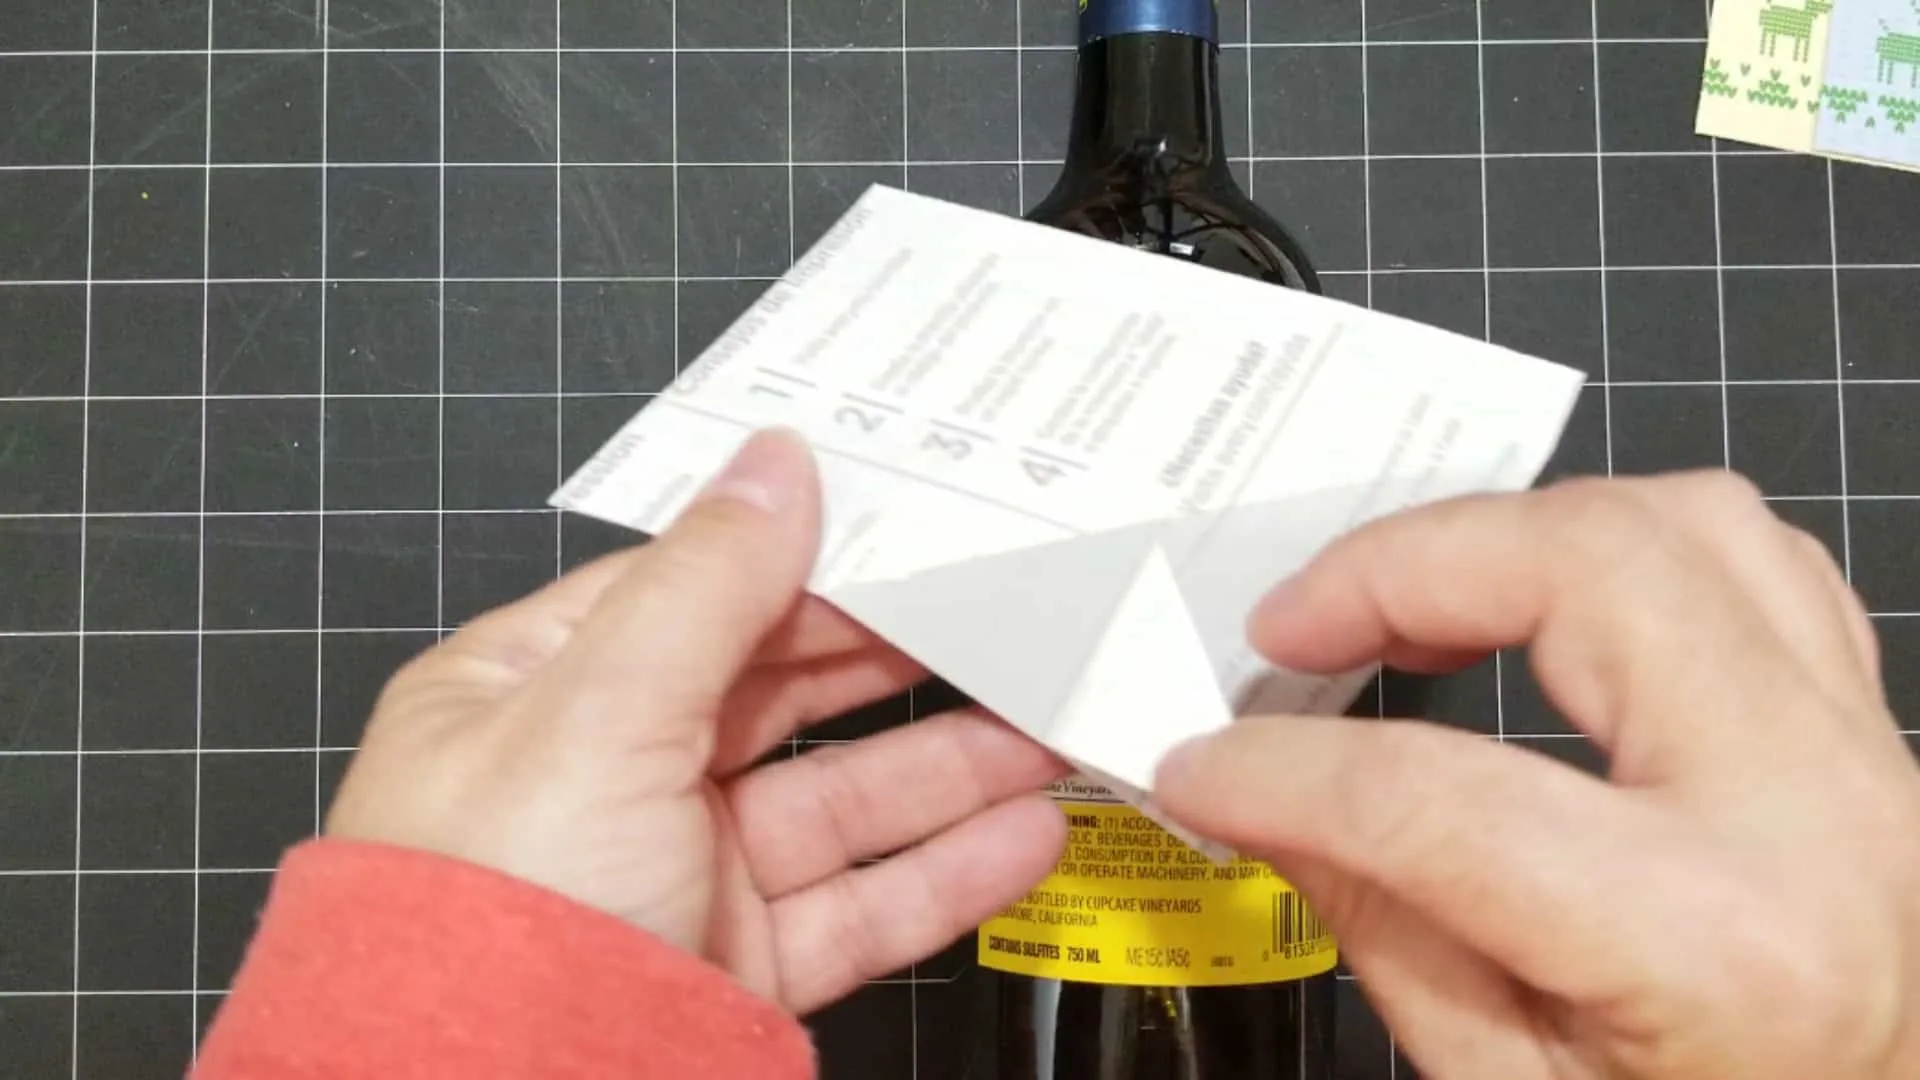 Peeling off the backing of the sticker paper to adhere the holiday wine label.